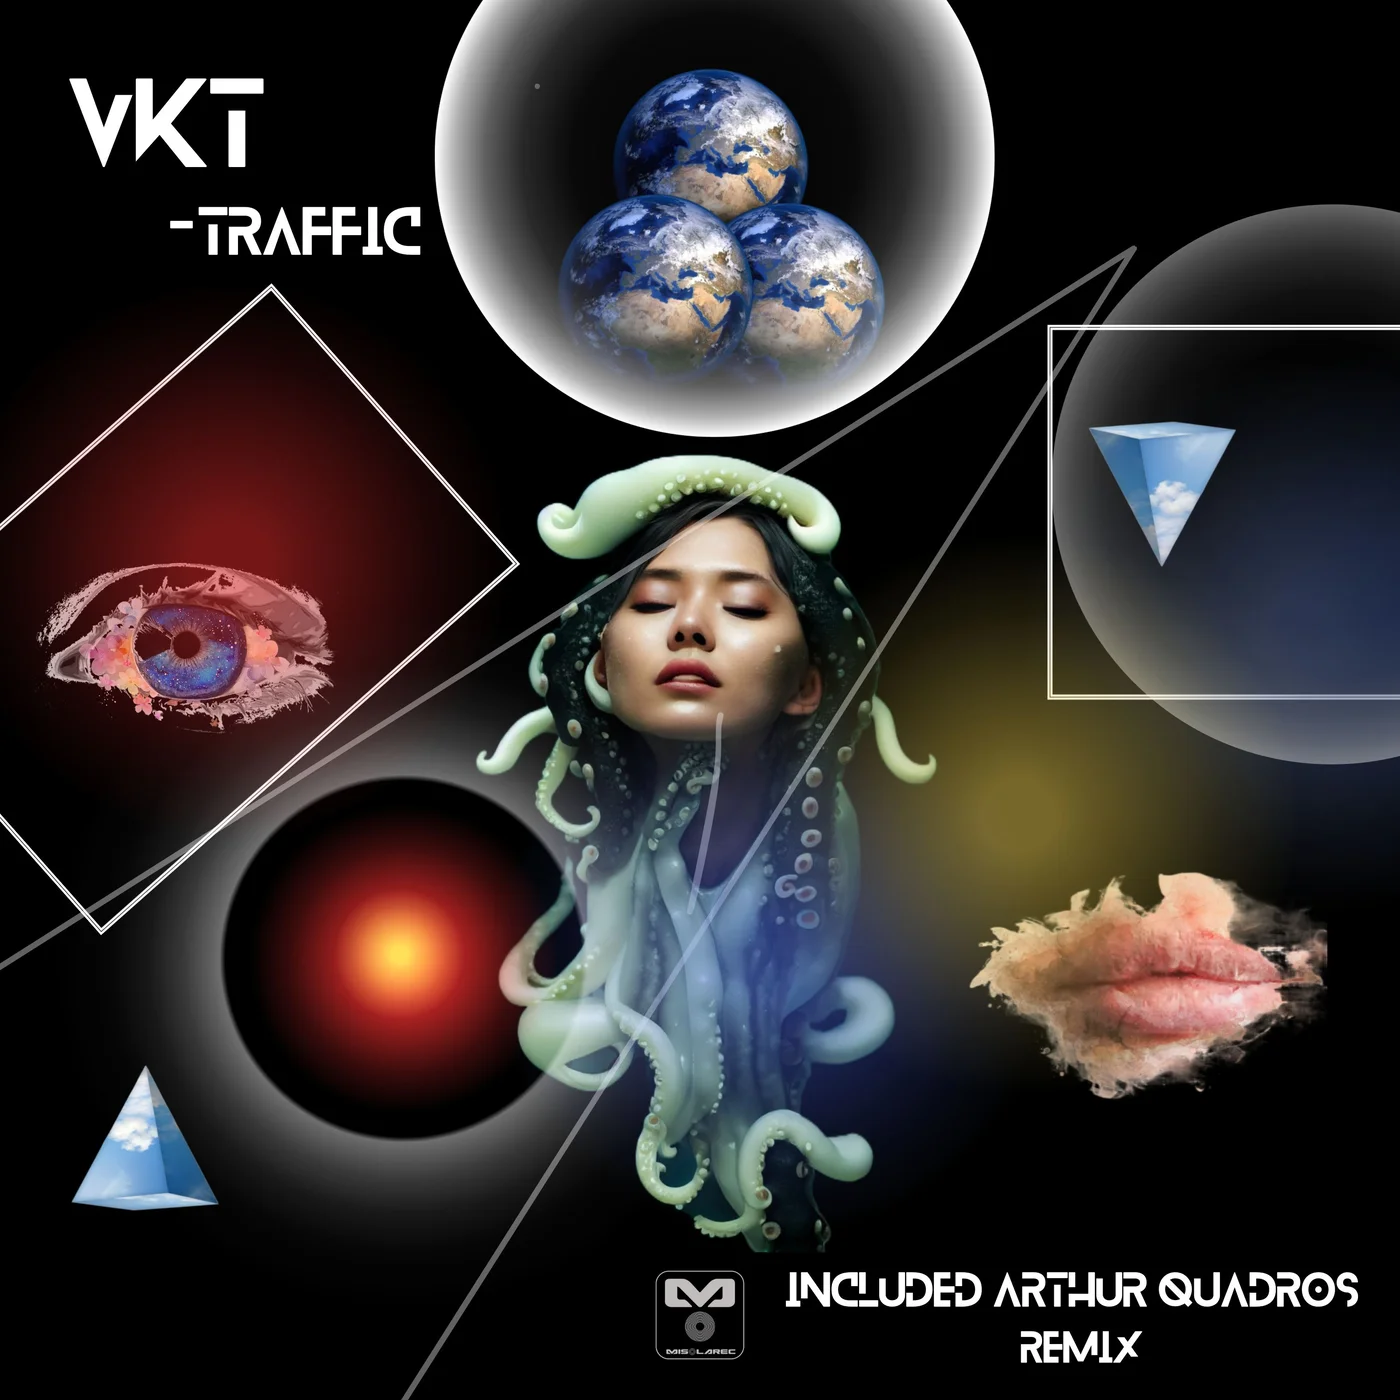 VKT’s latest single “Traffic” in now available on Misolarec Records